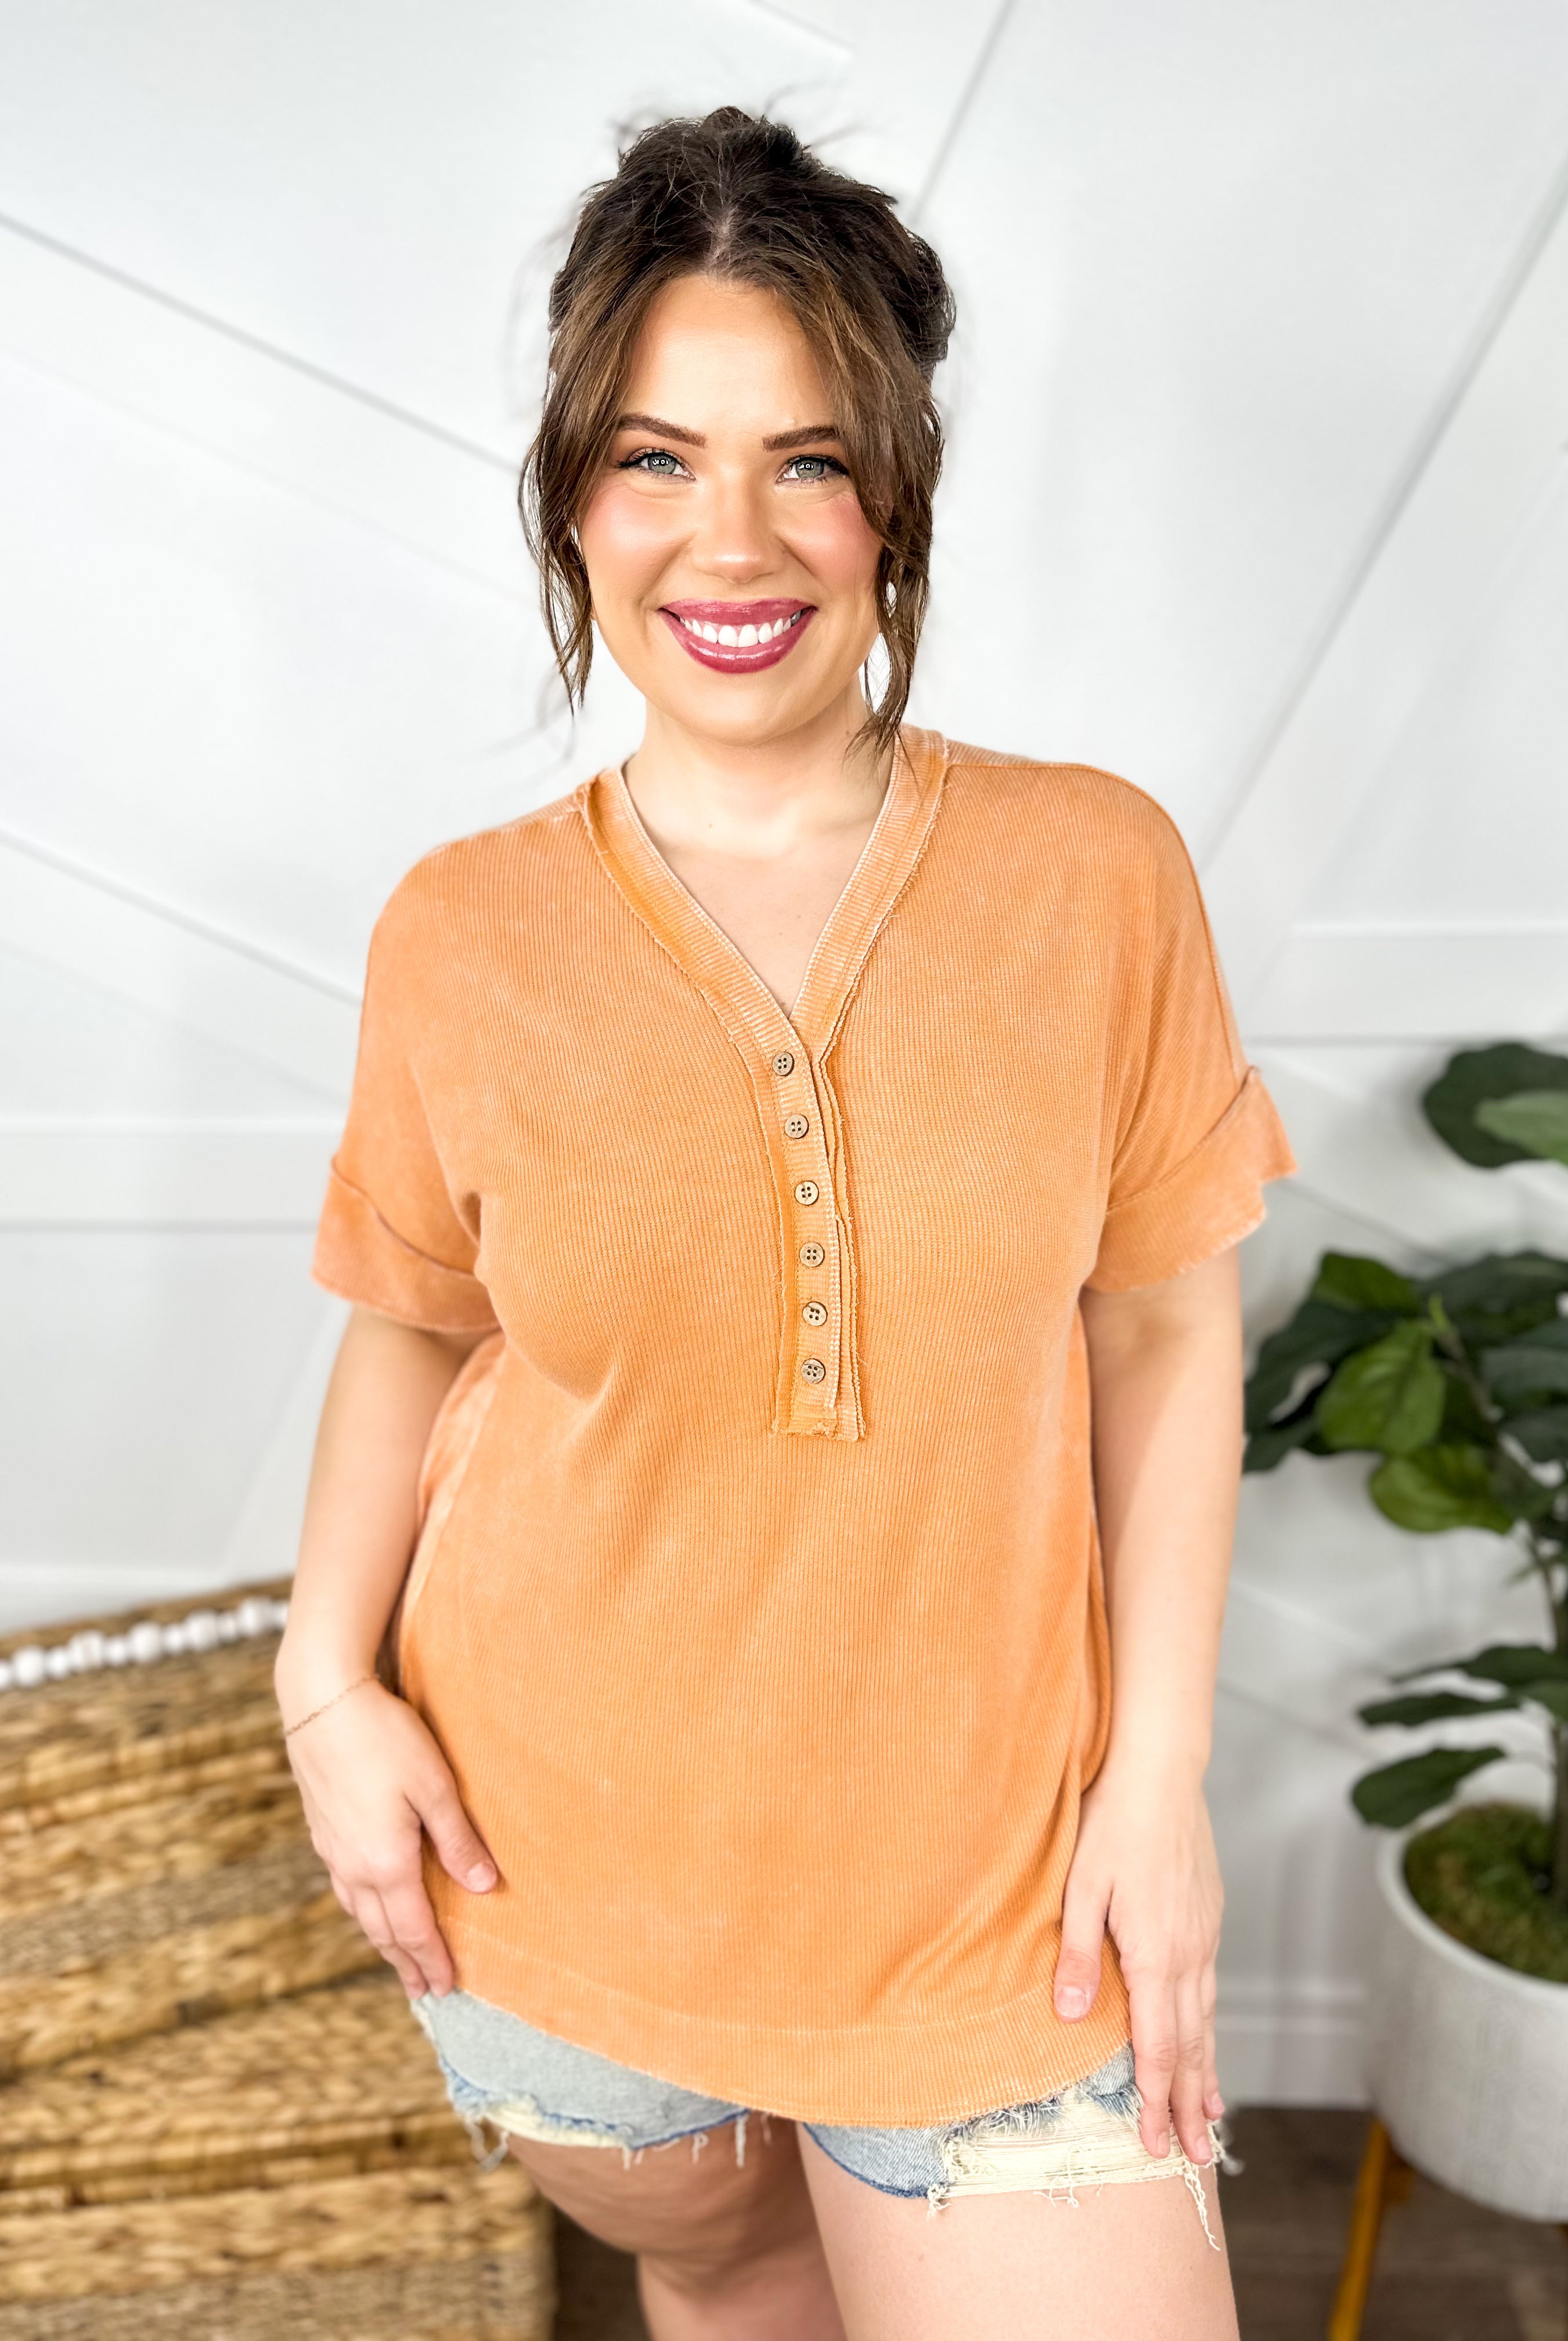 Voila Top-110 Short Sleeve Top-Easel-Heathered Boho Boutique, Women's Fashion and Accessories in Palmetto, FL